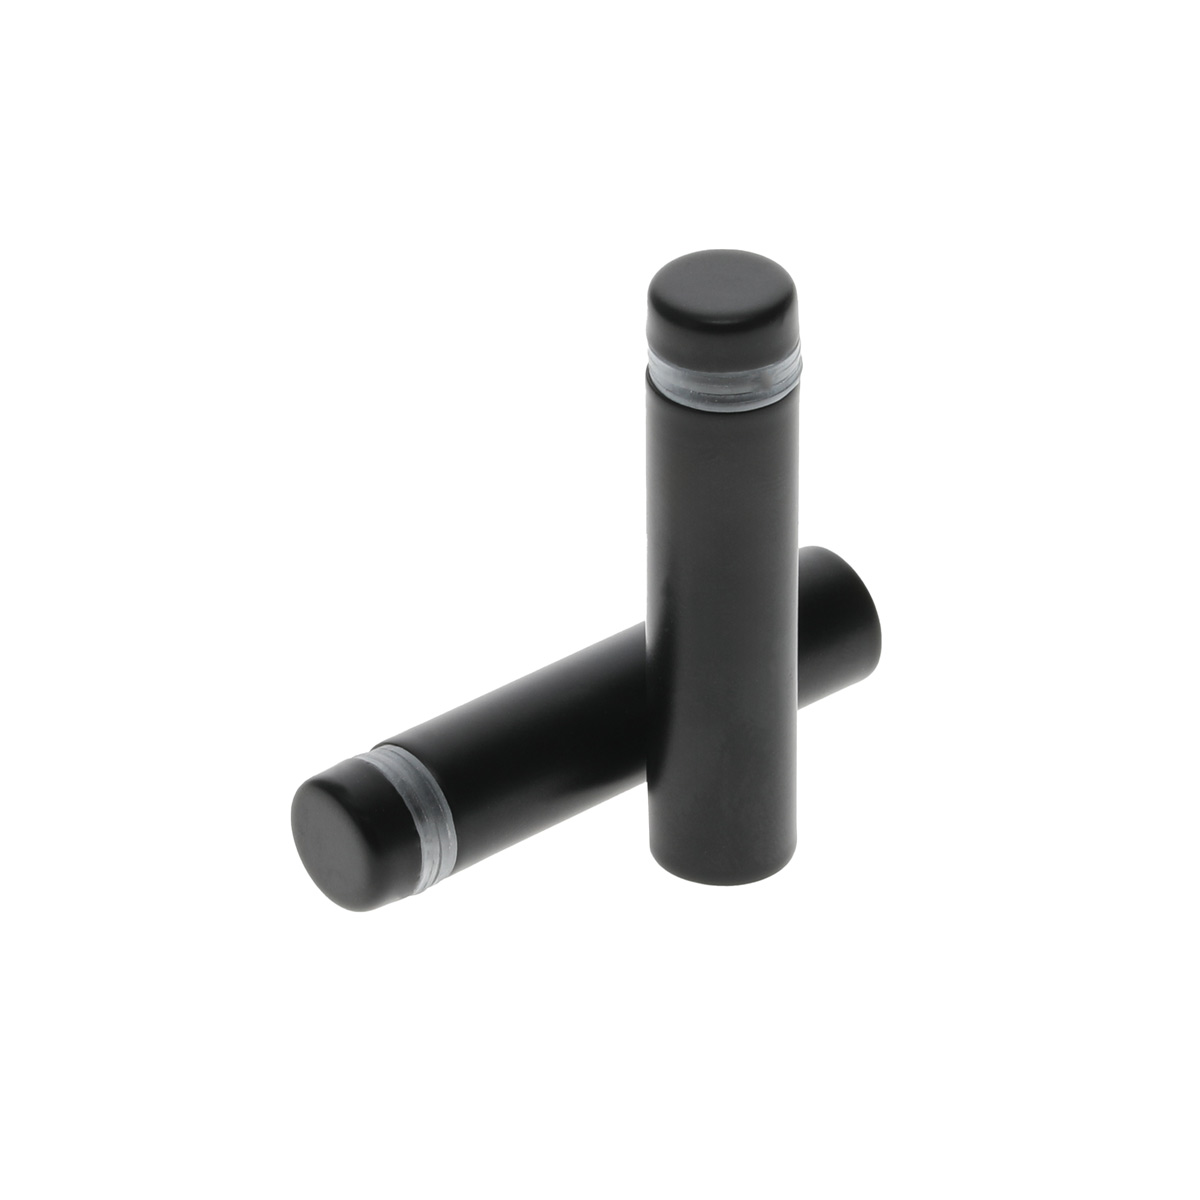 1/2'' Diameter X 1-3/4'' Barrel Length, Hollow Stainless Steel Matte Black Finish. Easy Fasten Standoff (For Inside Use Only) [Required Material Hole Size: 3/8'']